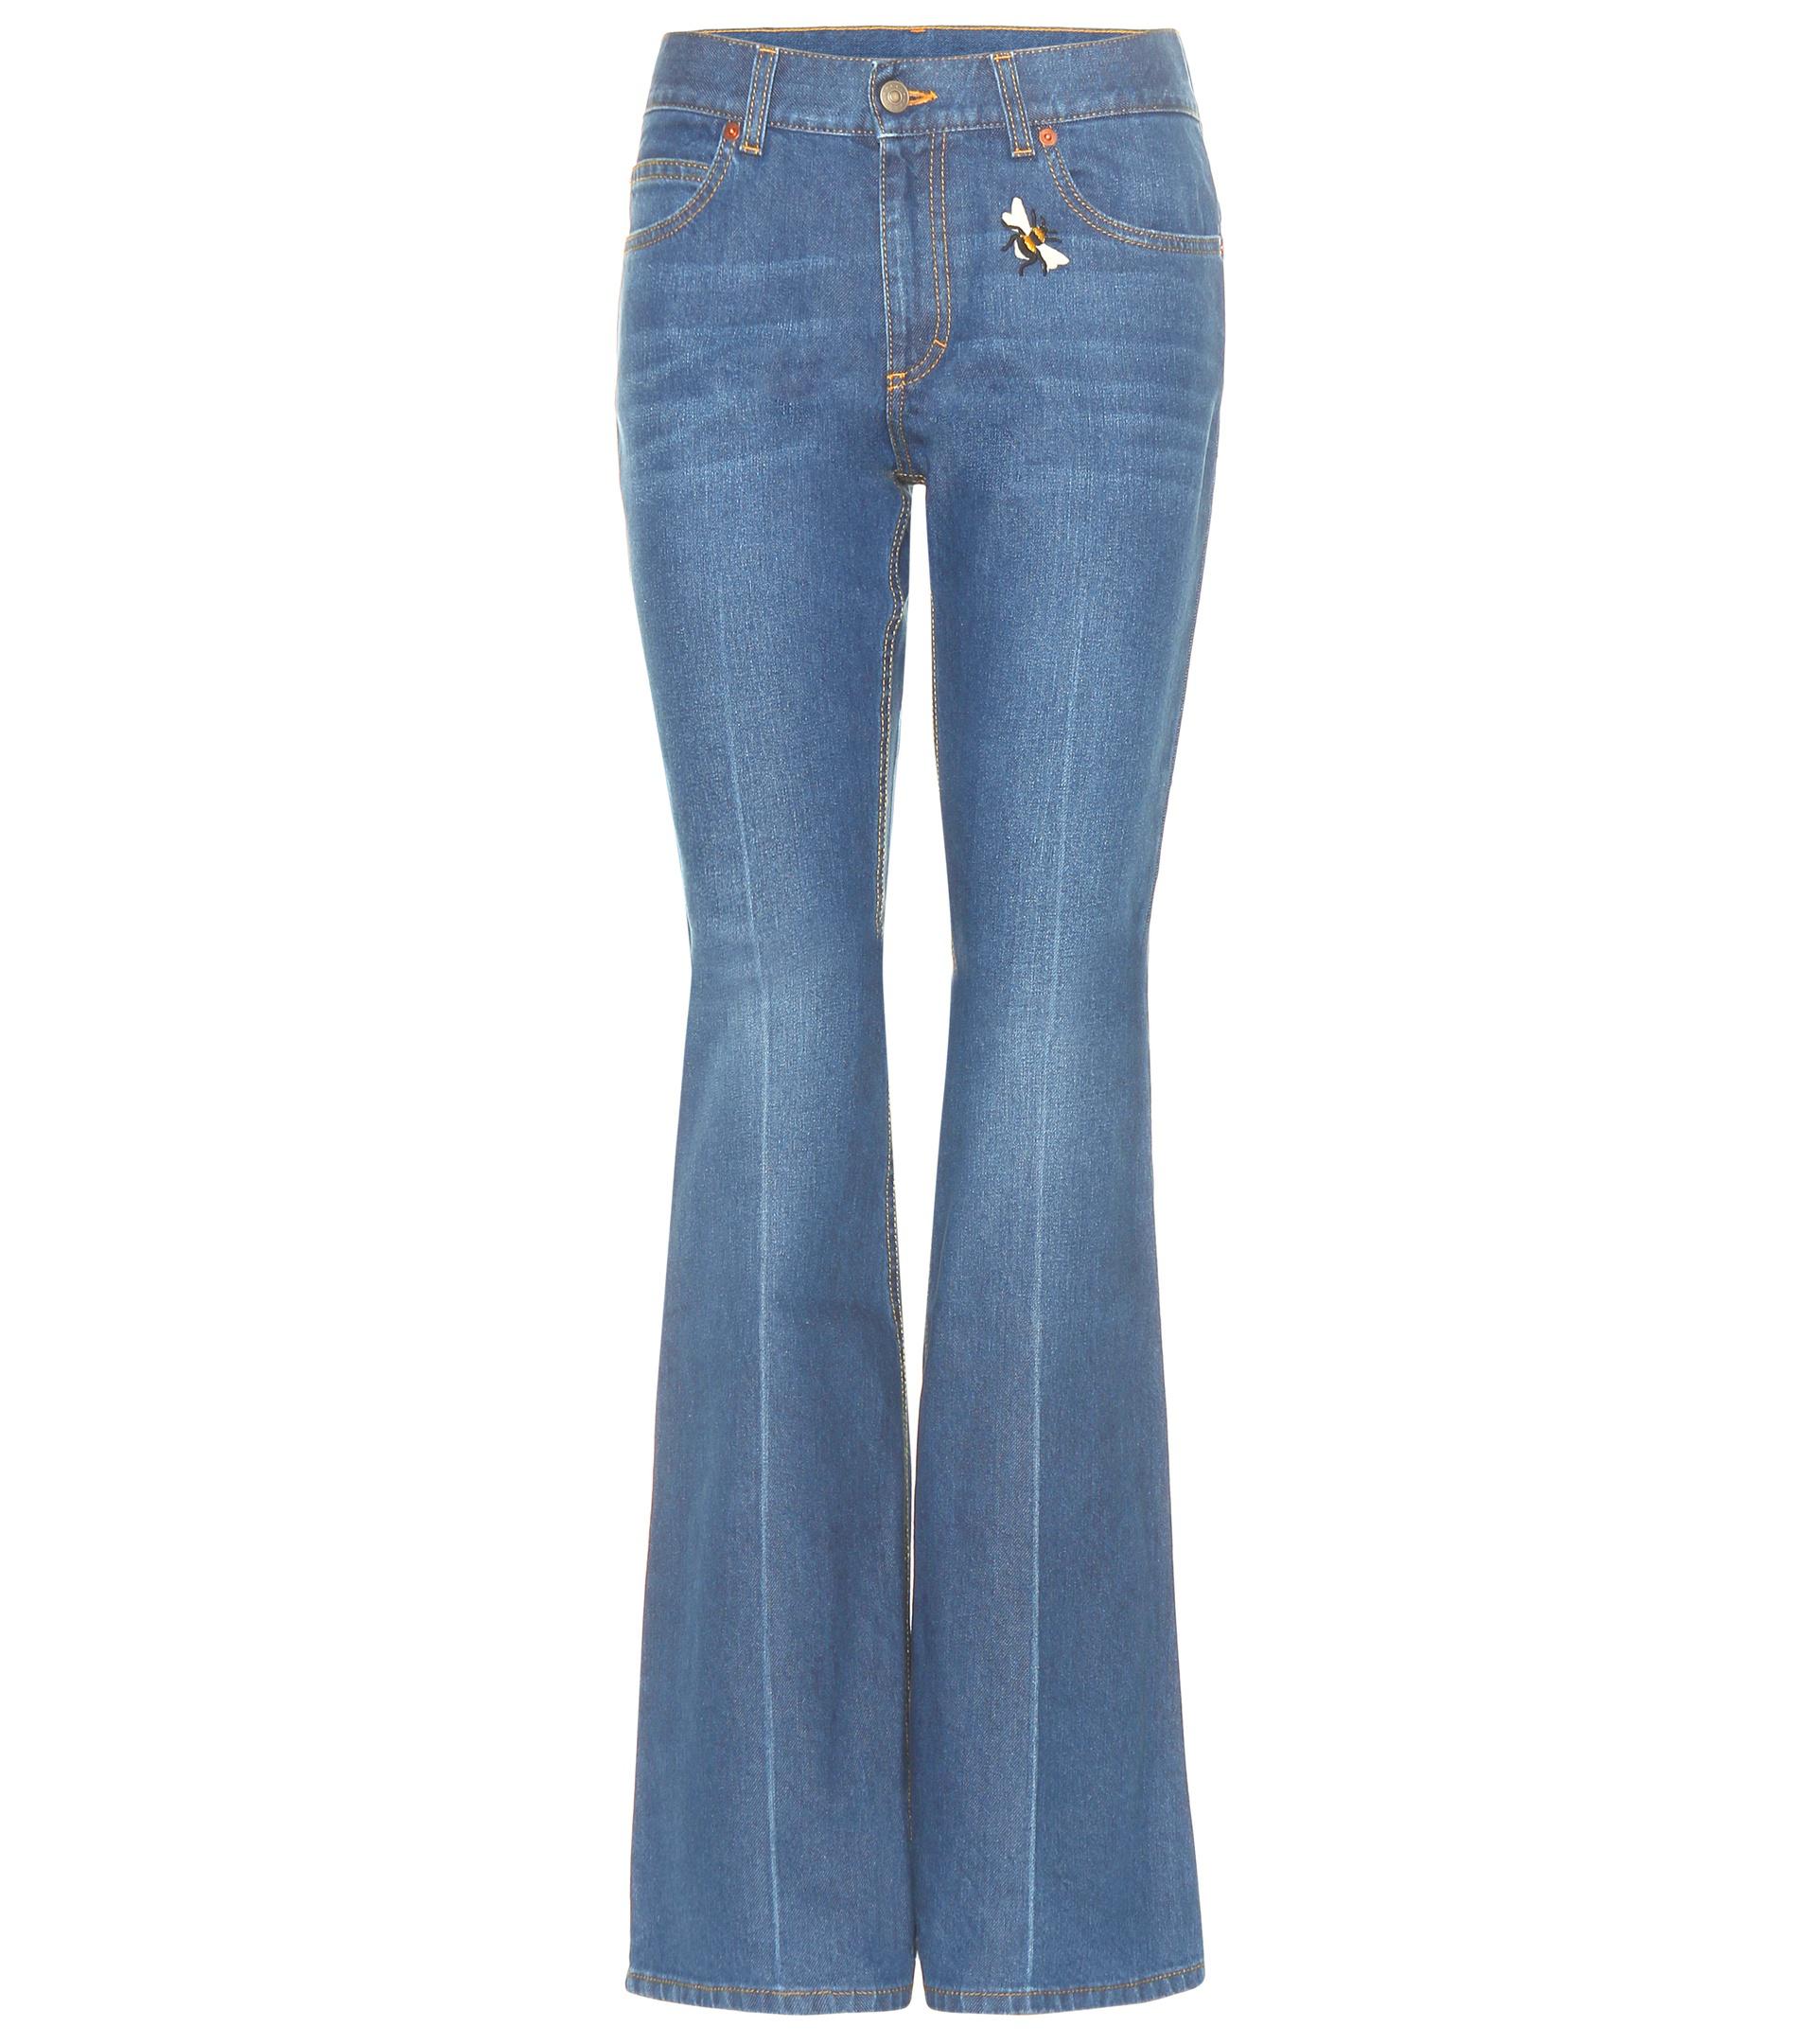 Gucci Denim Embroidered Flared Jeans in Blue - Lyst